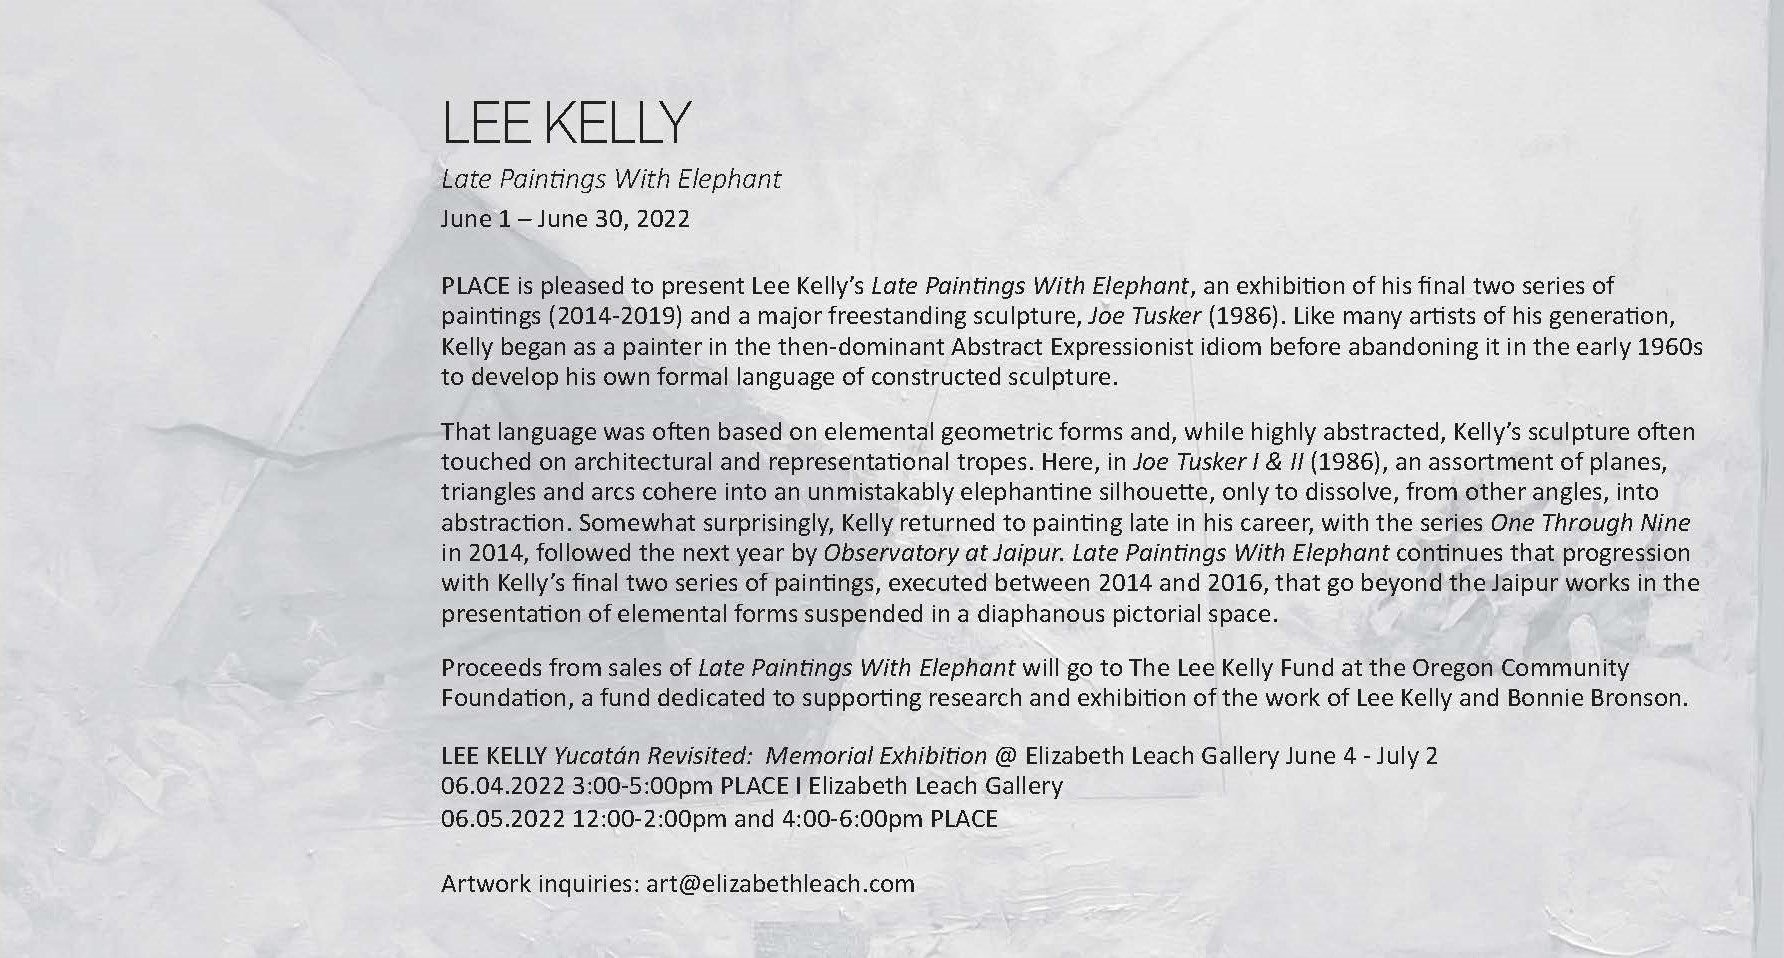 Lee Kelly | Late Paintings With Elephant | Image 1/5